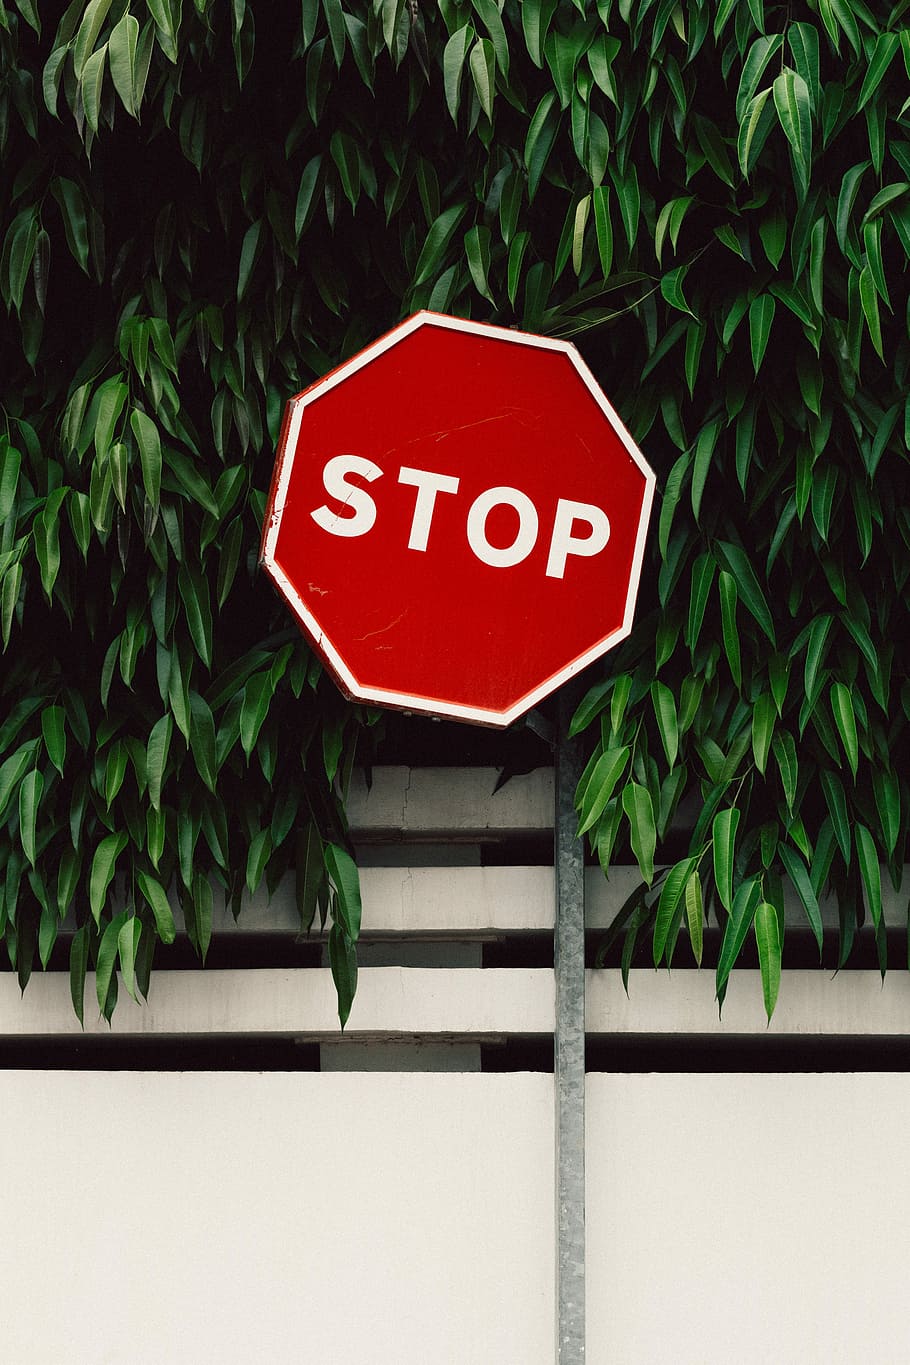 red and white Stop road sign near green tree, stop signage, street sign